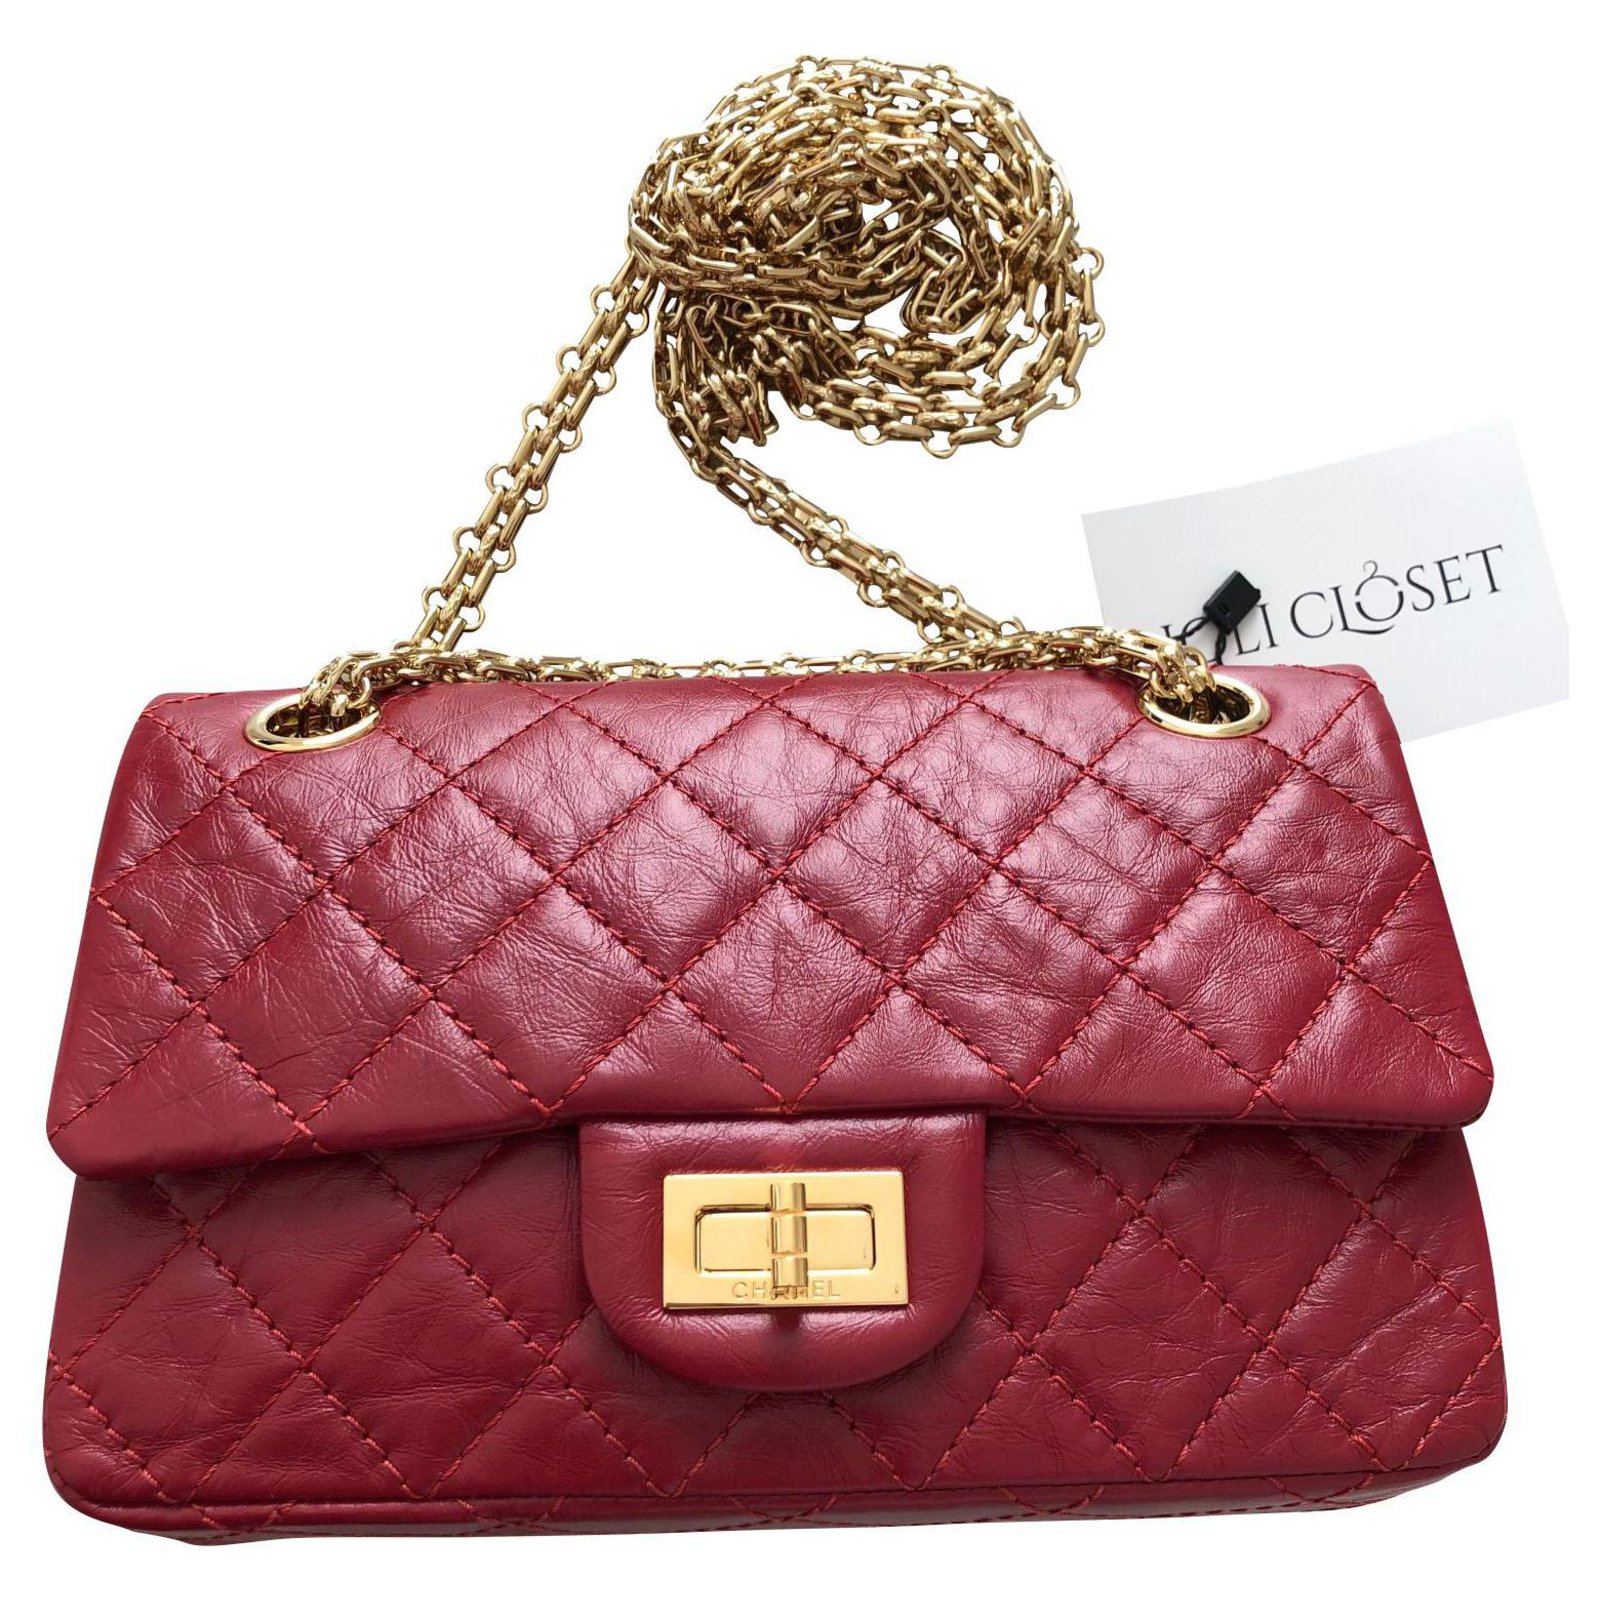 Chanel Reissue  Mini bag, red and shiny gold hw Leather  -  Joli Closet